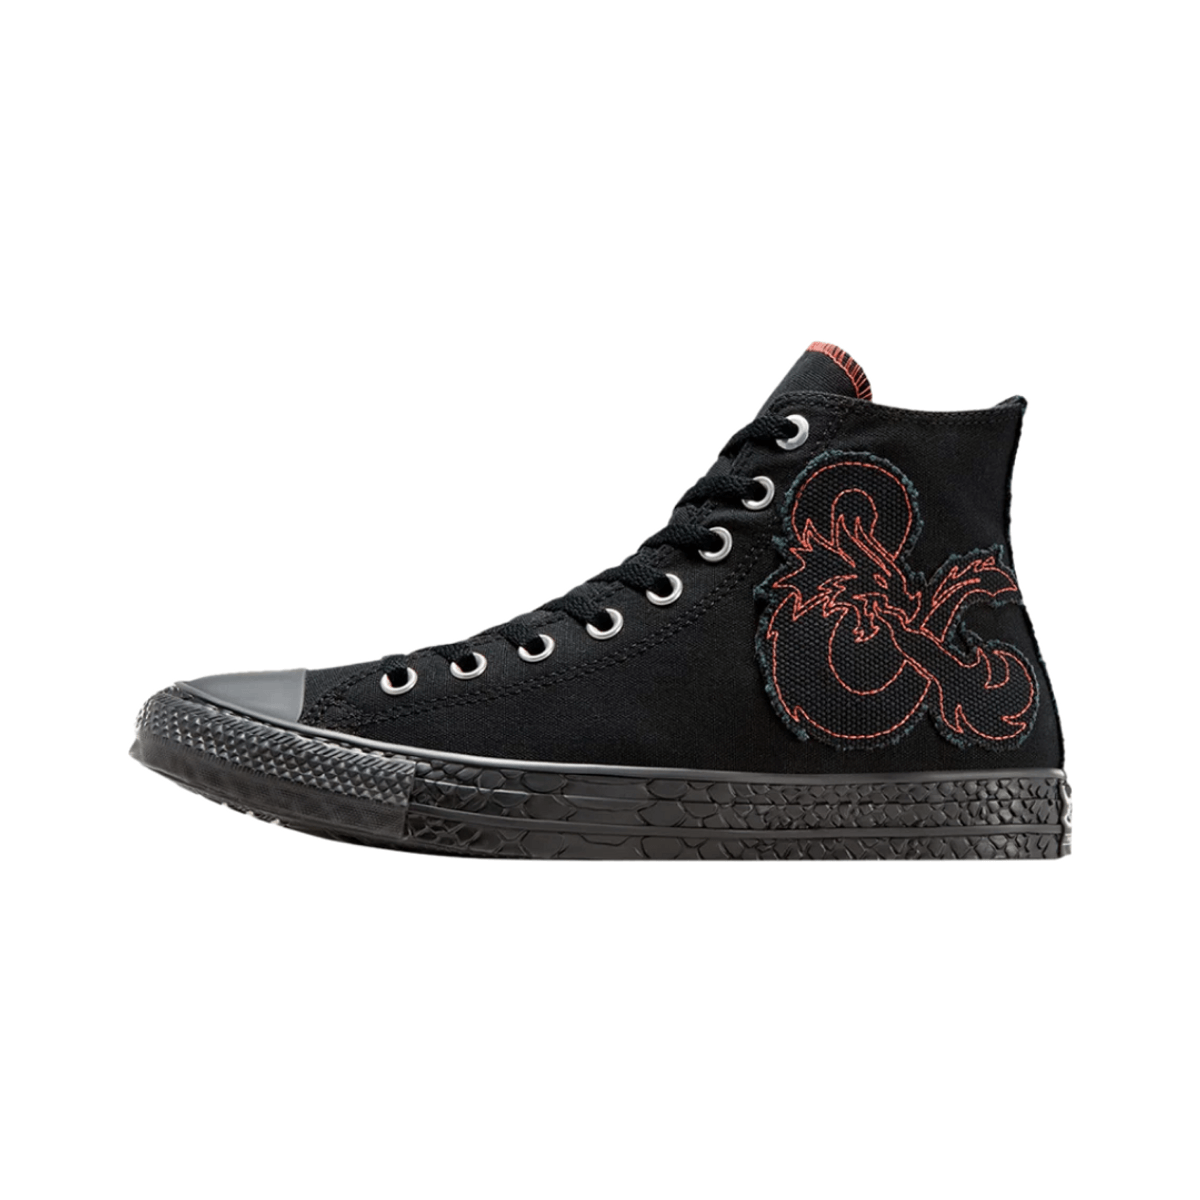 Dungeons & Dragons x Converse Chuck Taylor All-Star Black Red